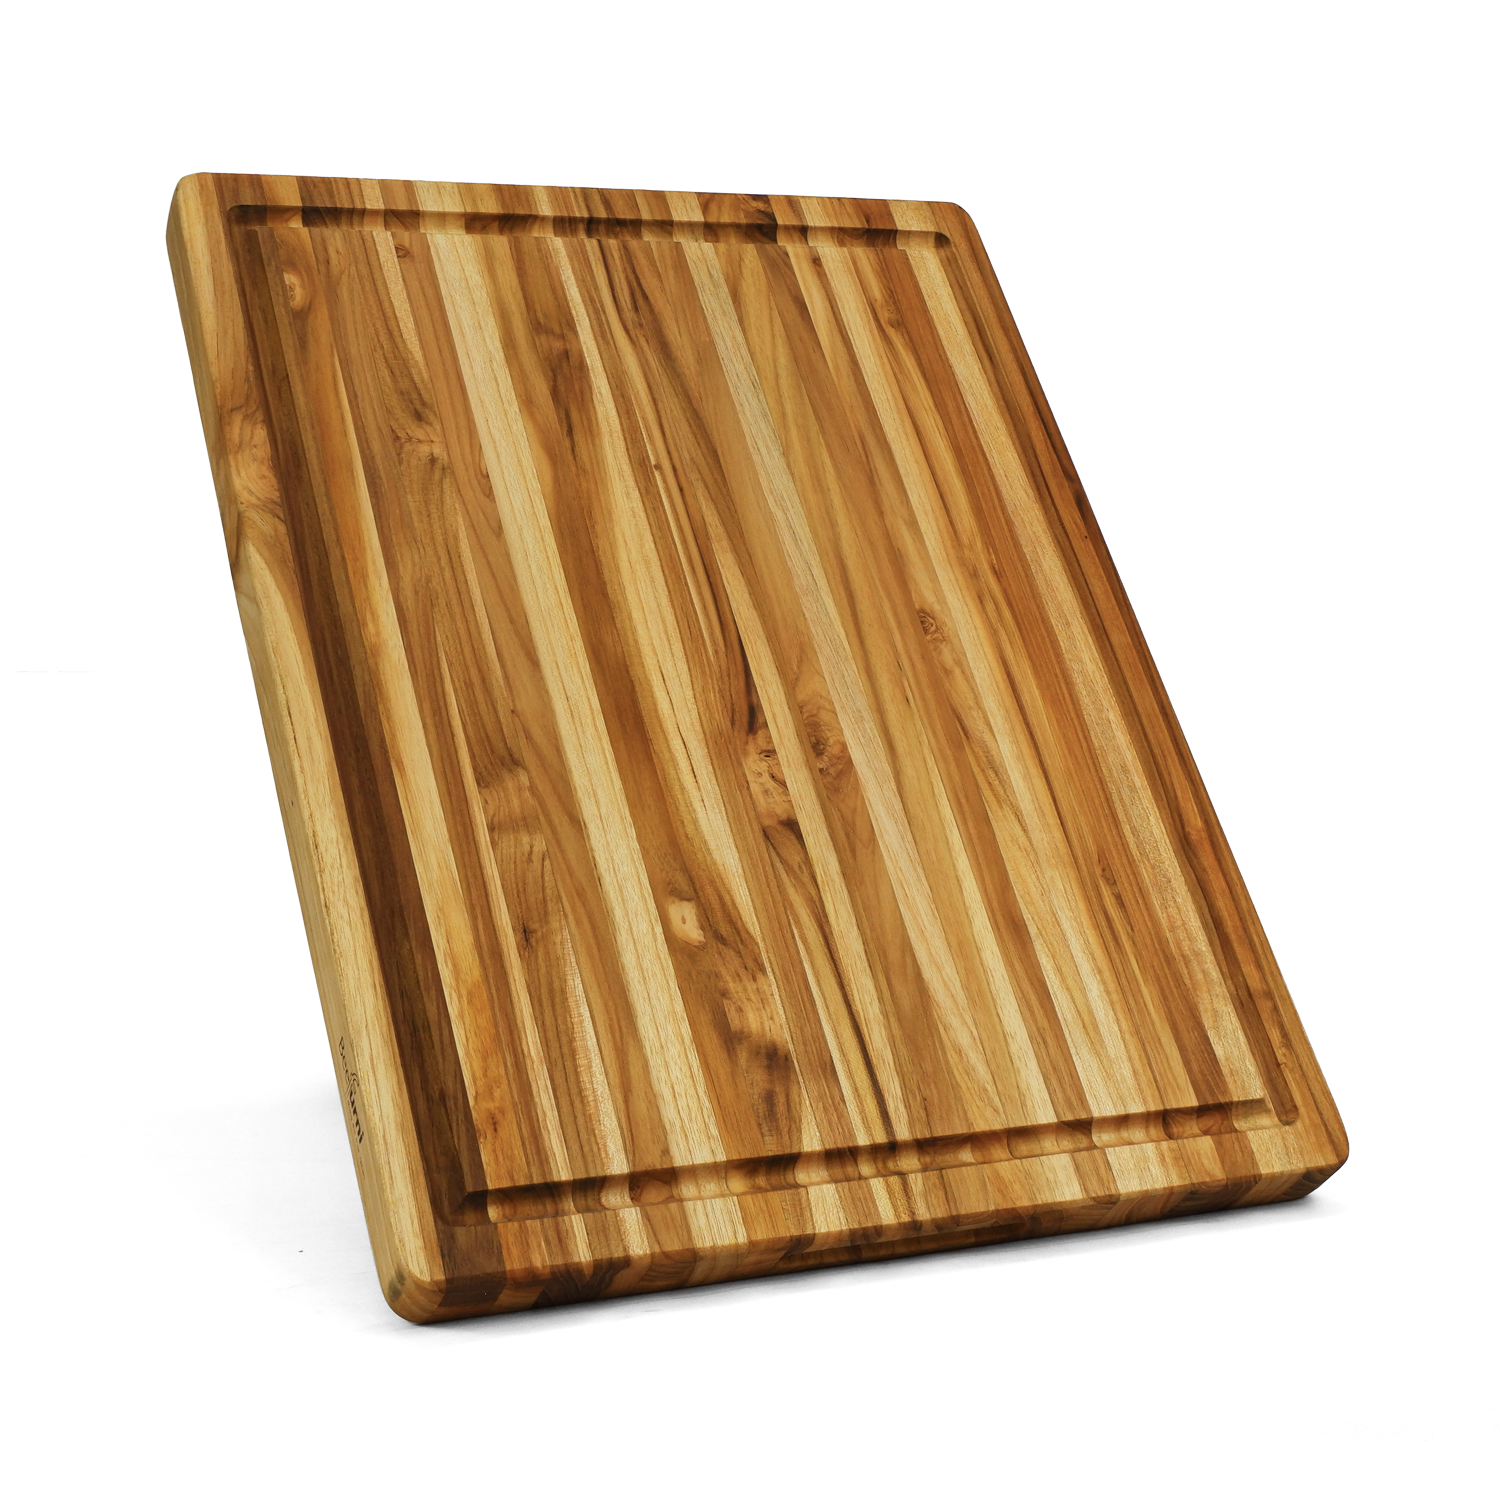 BEEFURNI Rectangular Real Teak Wood Cutting Board With Juice Groove 20 INCH, Pack of 5 pieces-CASAINC